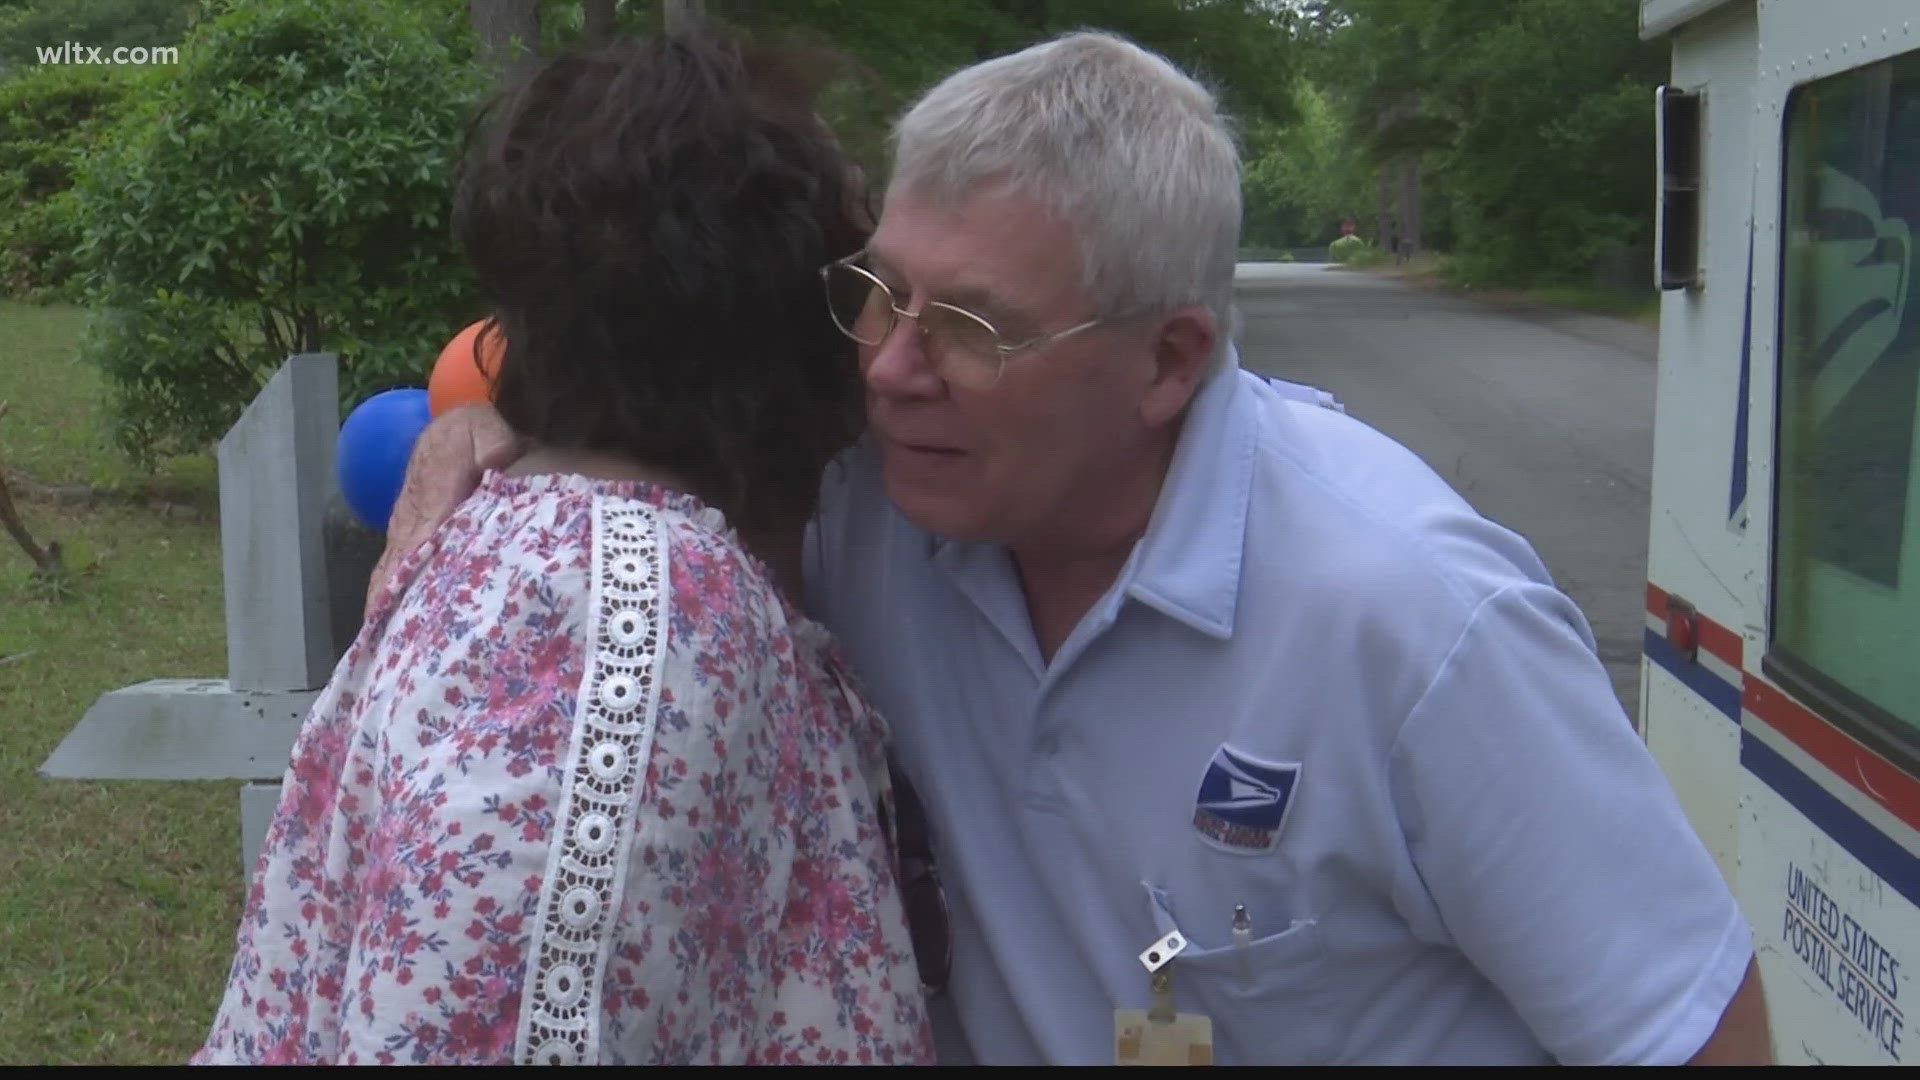 The Eau Claire postman Randy Marshall was celebrated with well wishes and balloons adoring the mailboxes on his route.